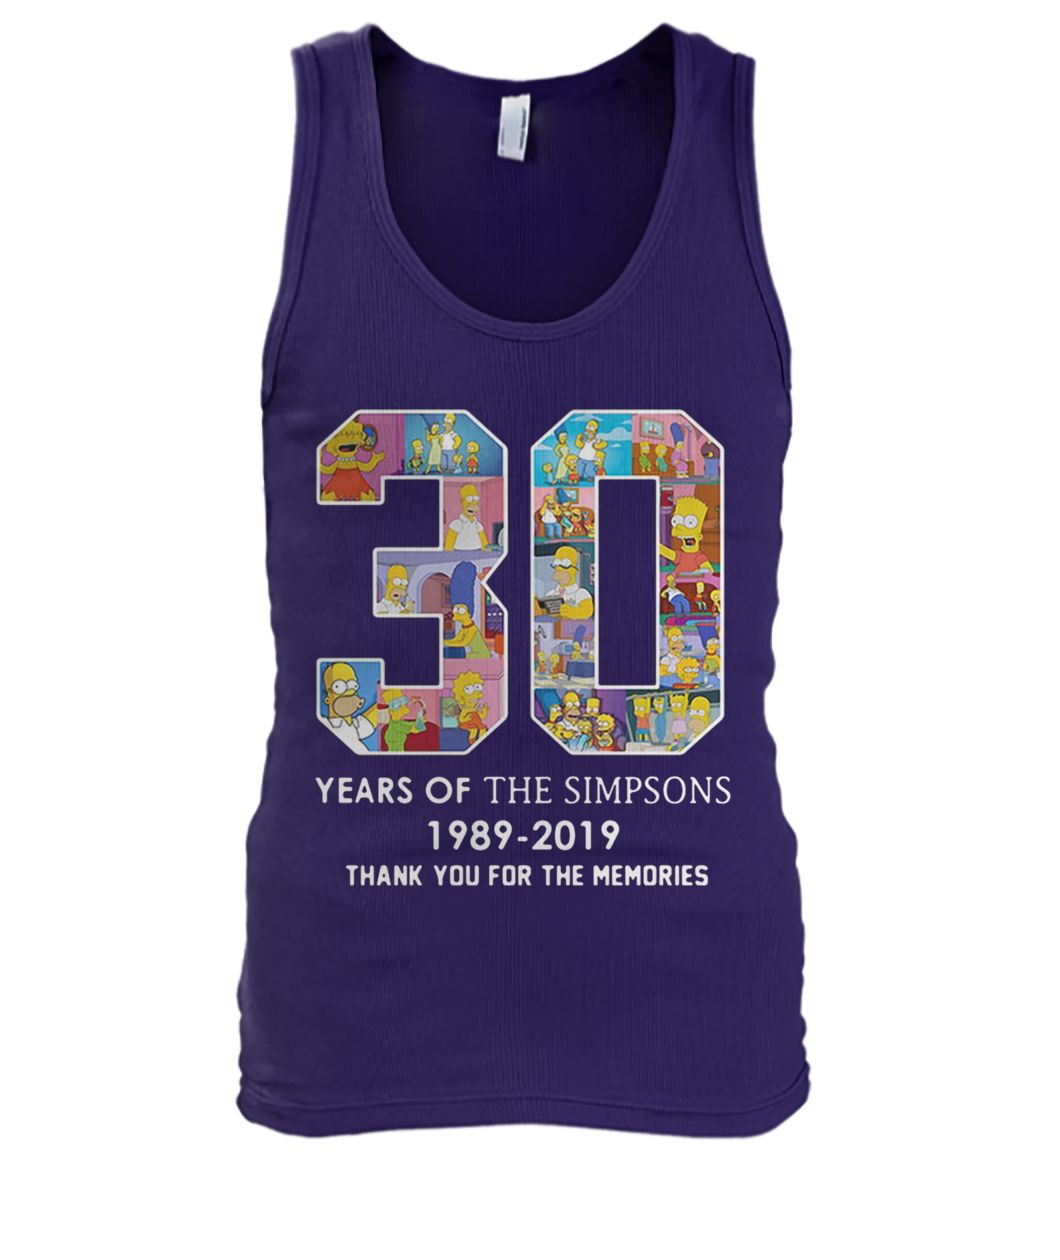 30 years of the Simpsons 1989 2019 thank you for the memories men's tank top